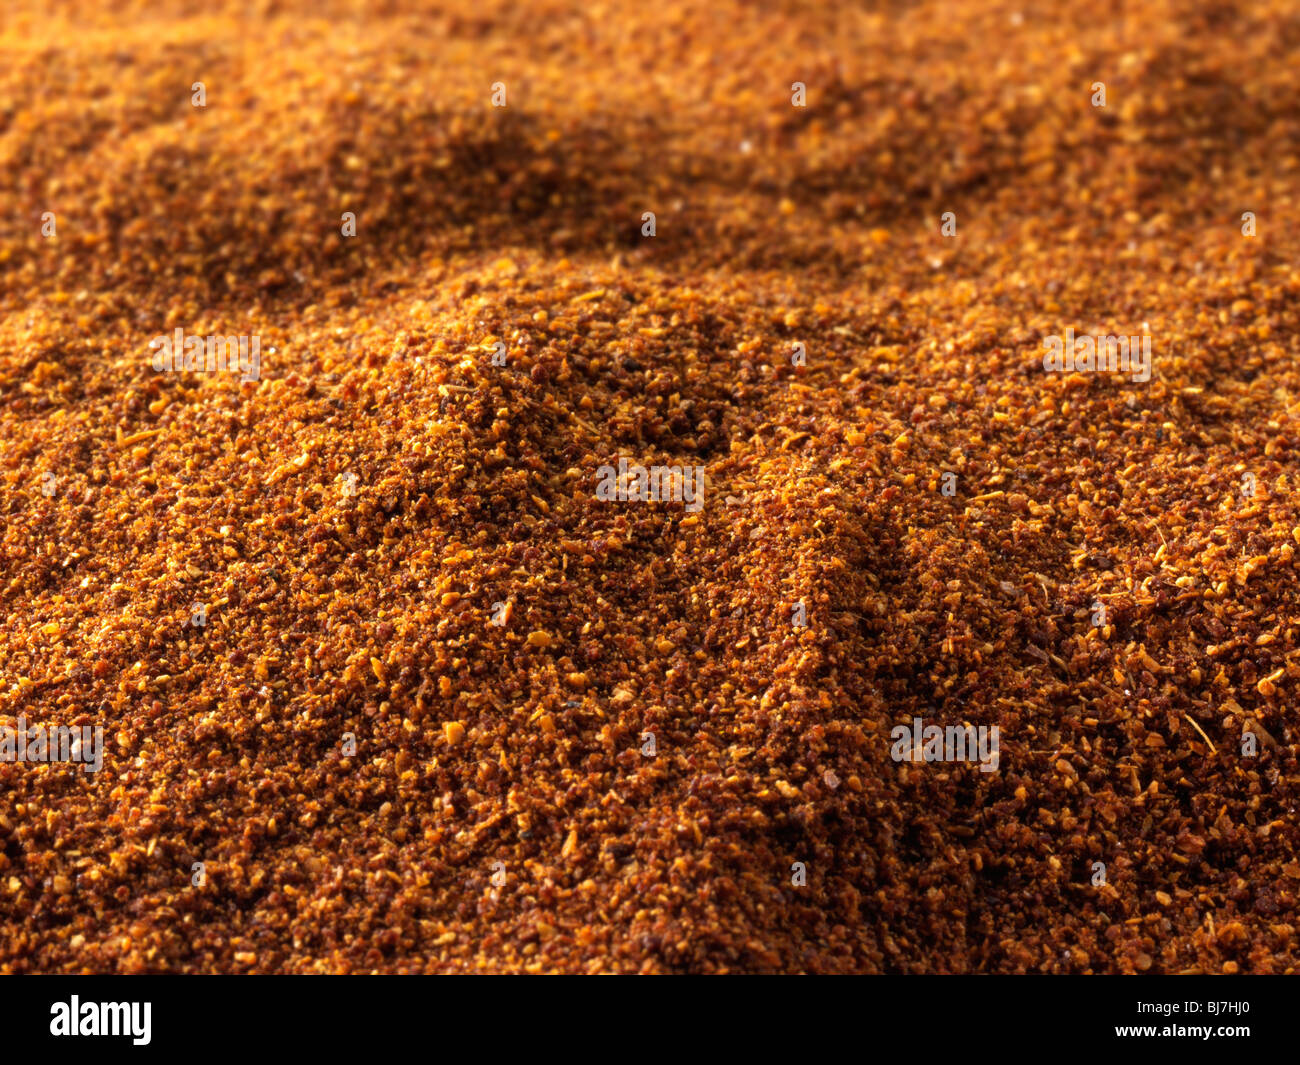 Paprica piccante [eros paprika ungherese] spice , close up full frame Foto Stock